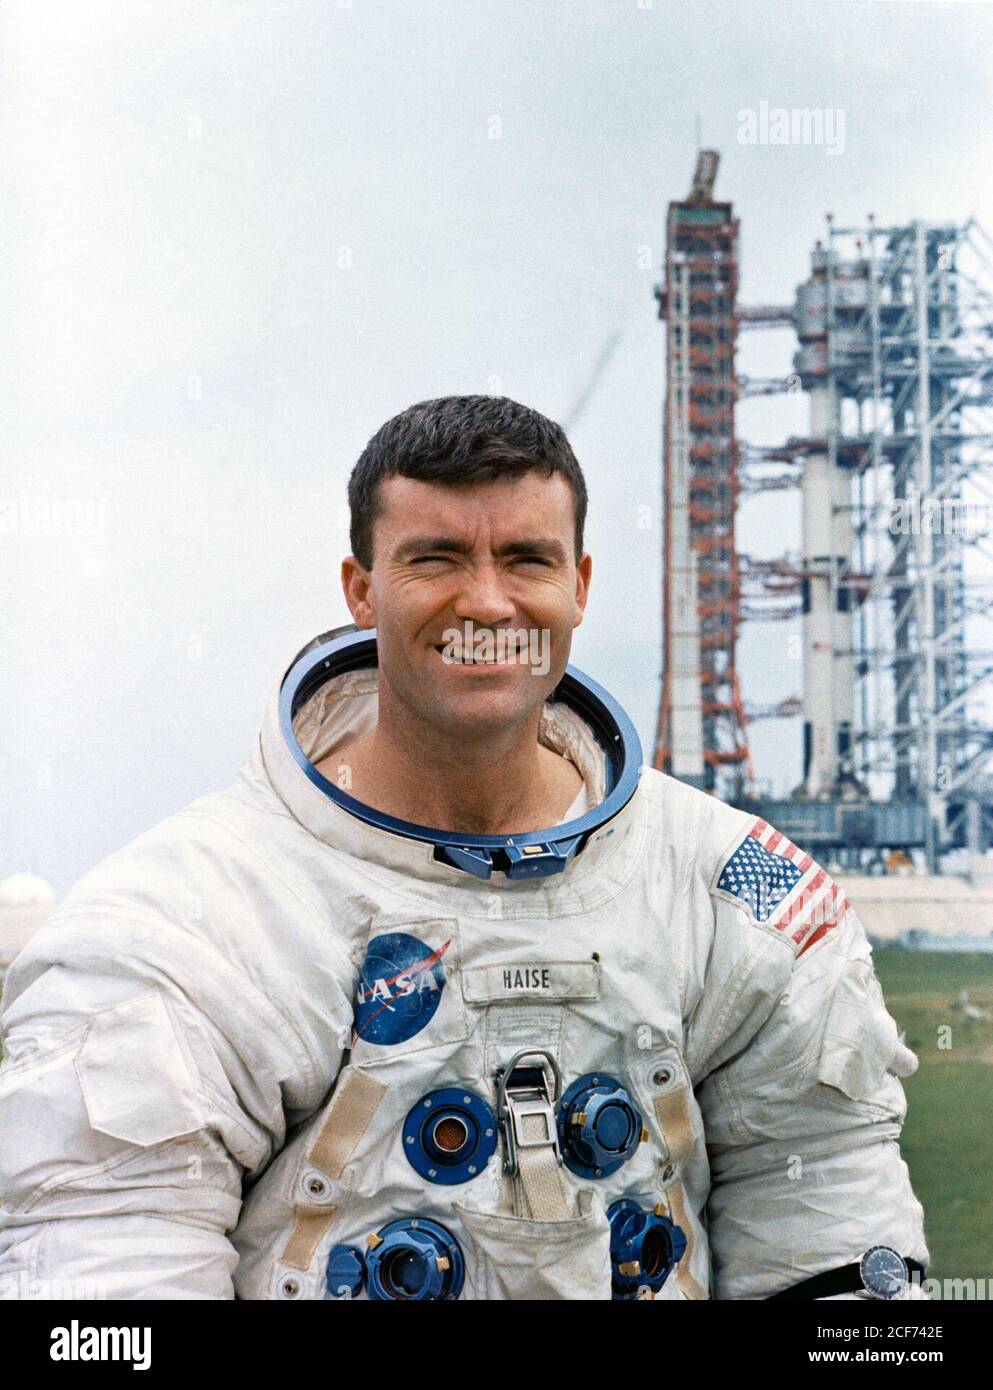 Fred Haise. Stock Photo